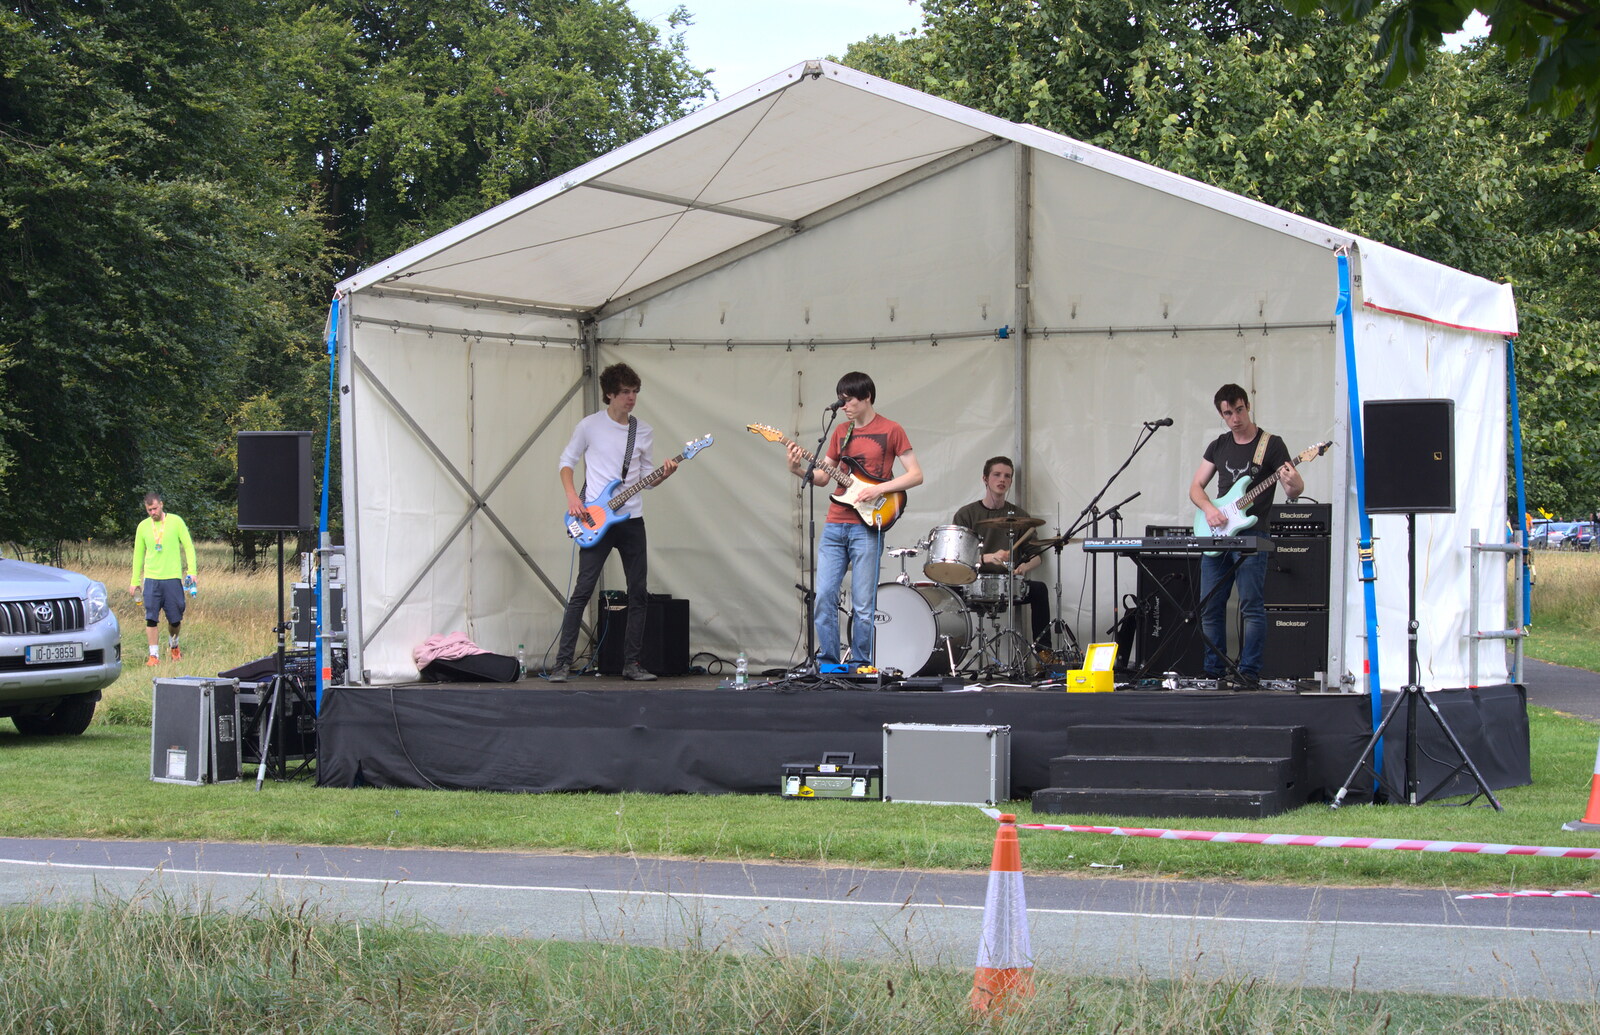 One of the bands on the marathon route from Isobel's Rock'n'Roll Half Marathon, Dublin, Ireland - 13th August 2017